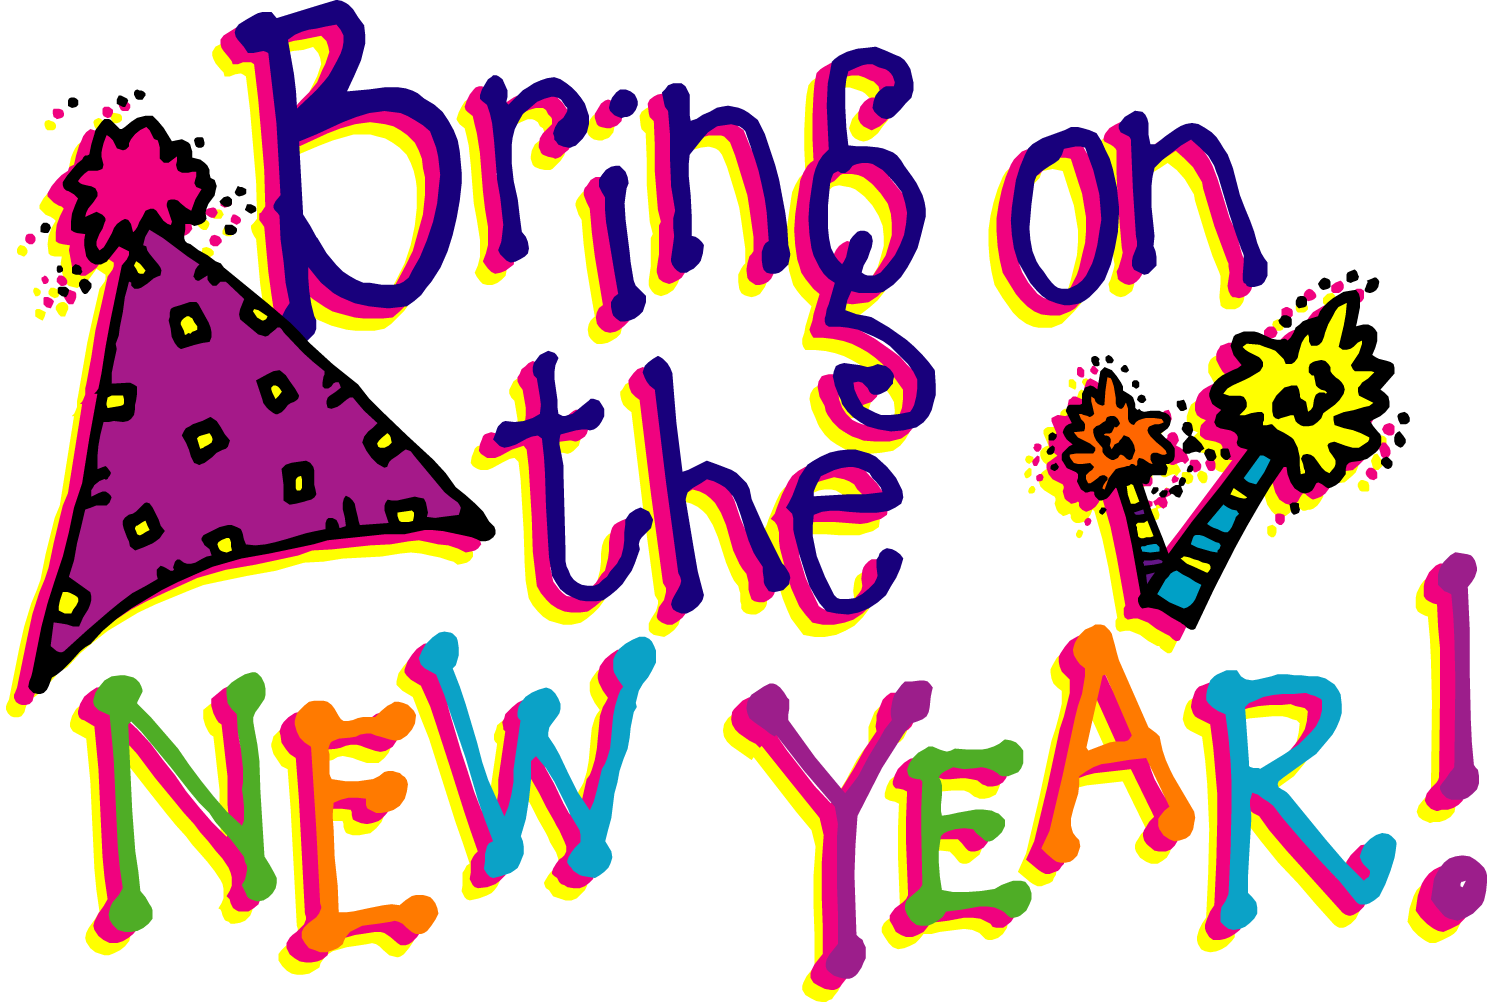 free-happy-new-year-clipart- 